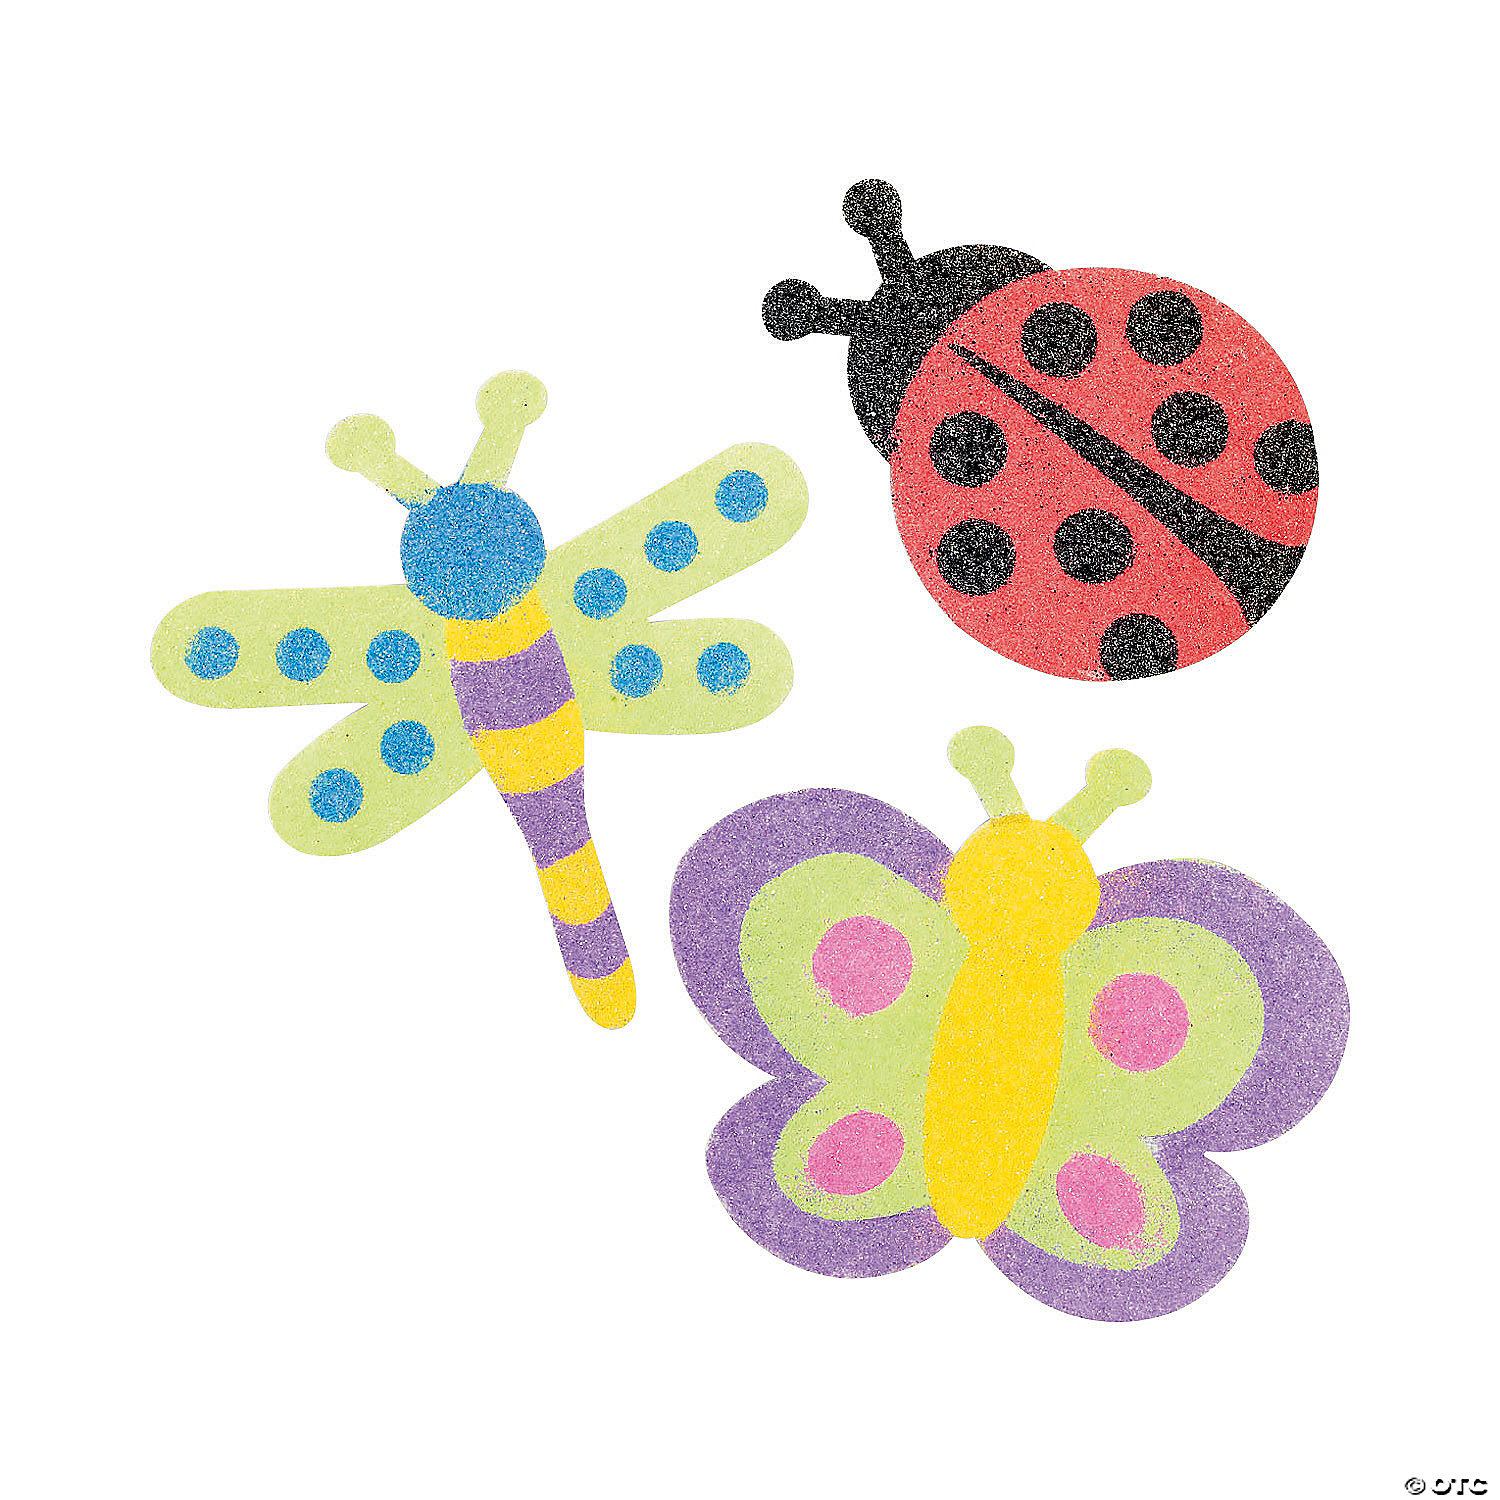 Butterfly, dragonfly and ladybug